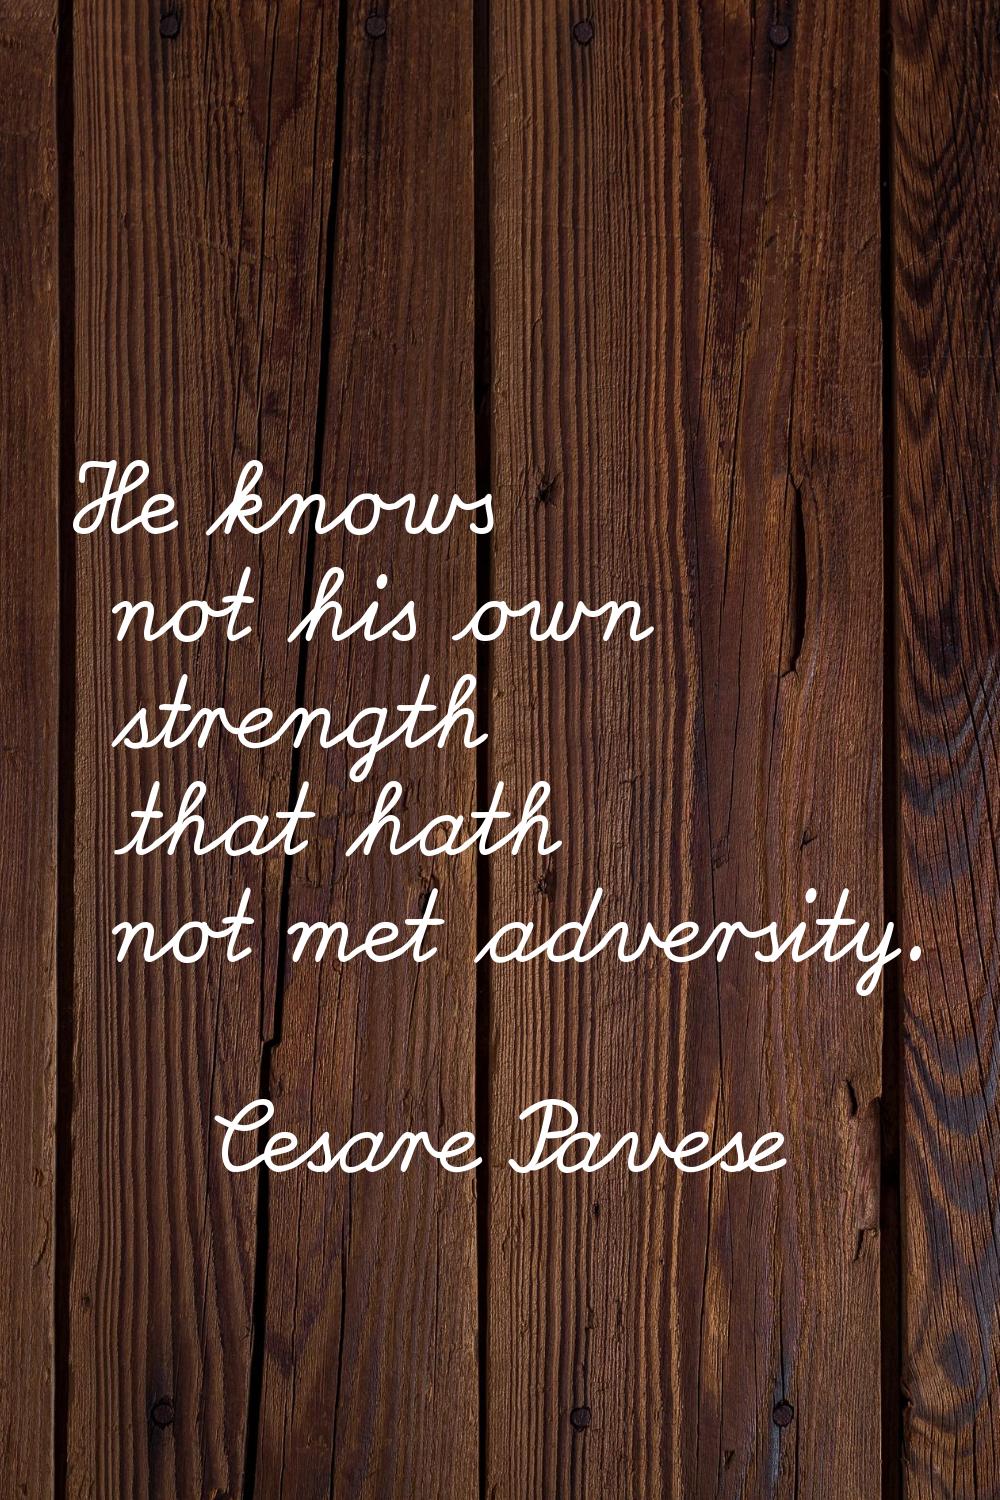 He knows not his own strength that hath not met adversity.